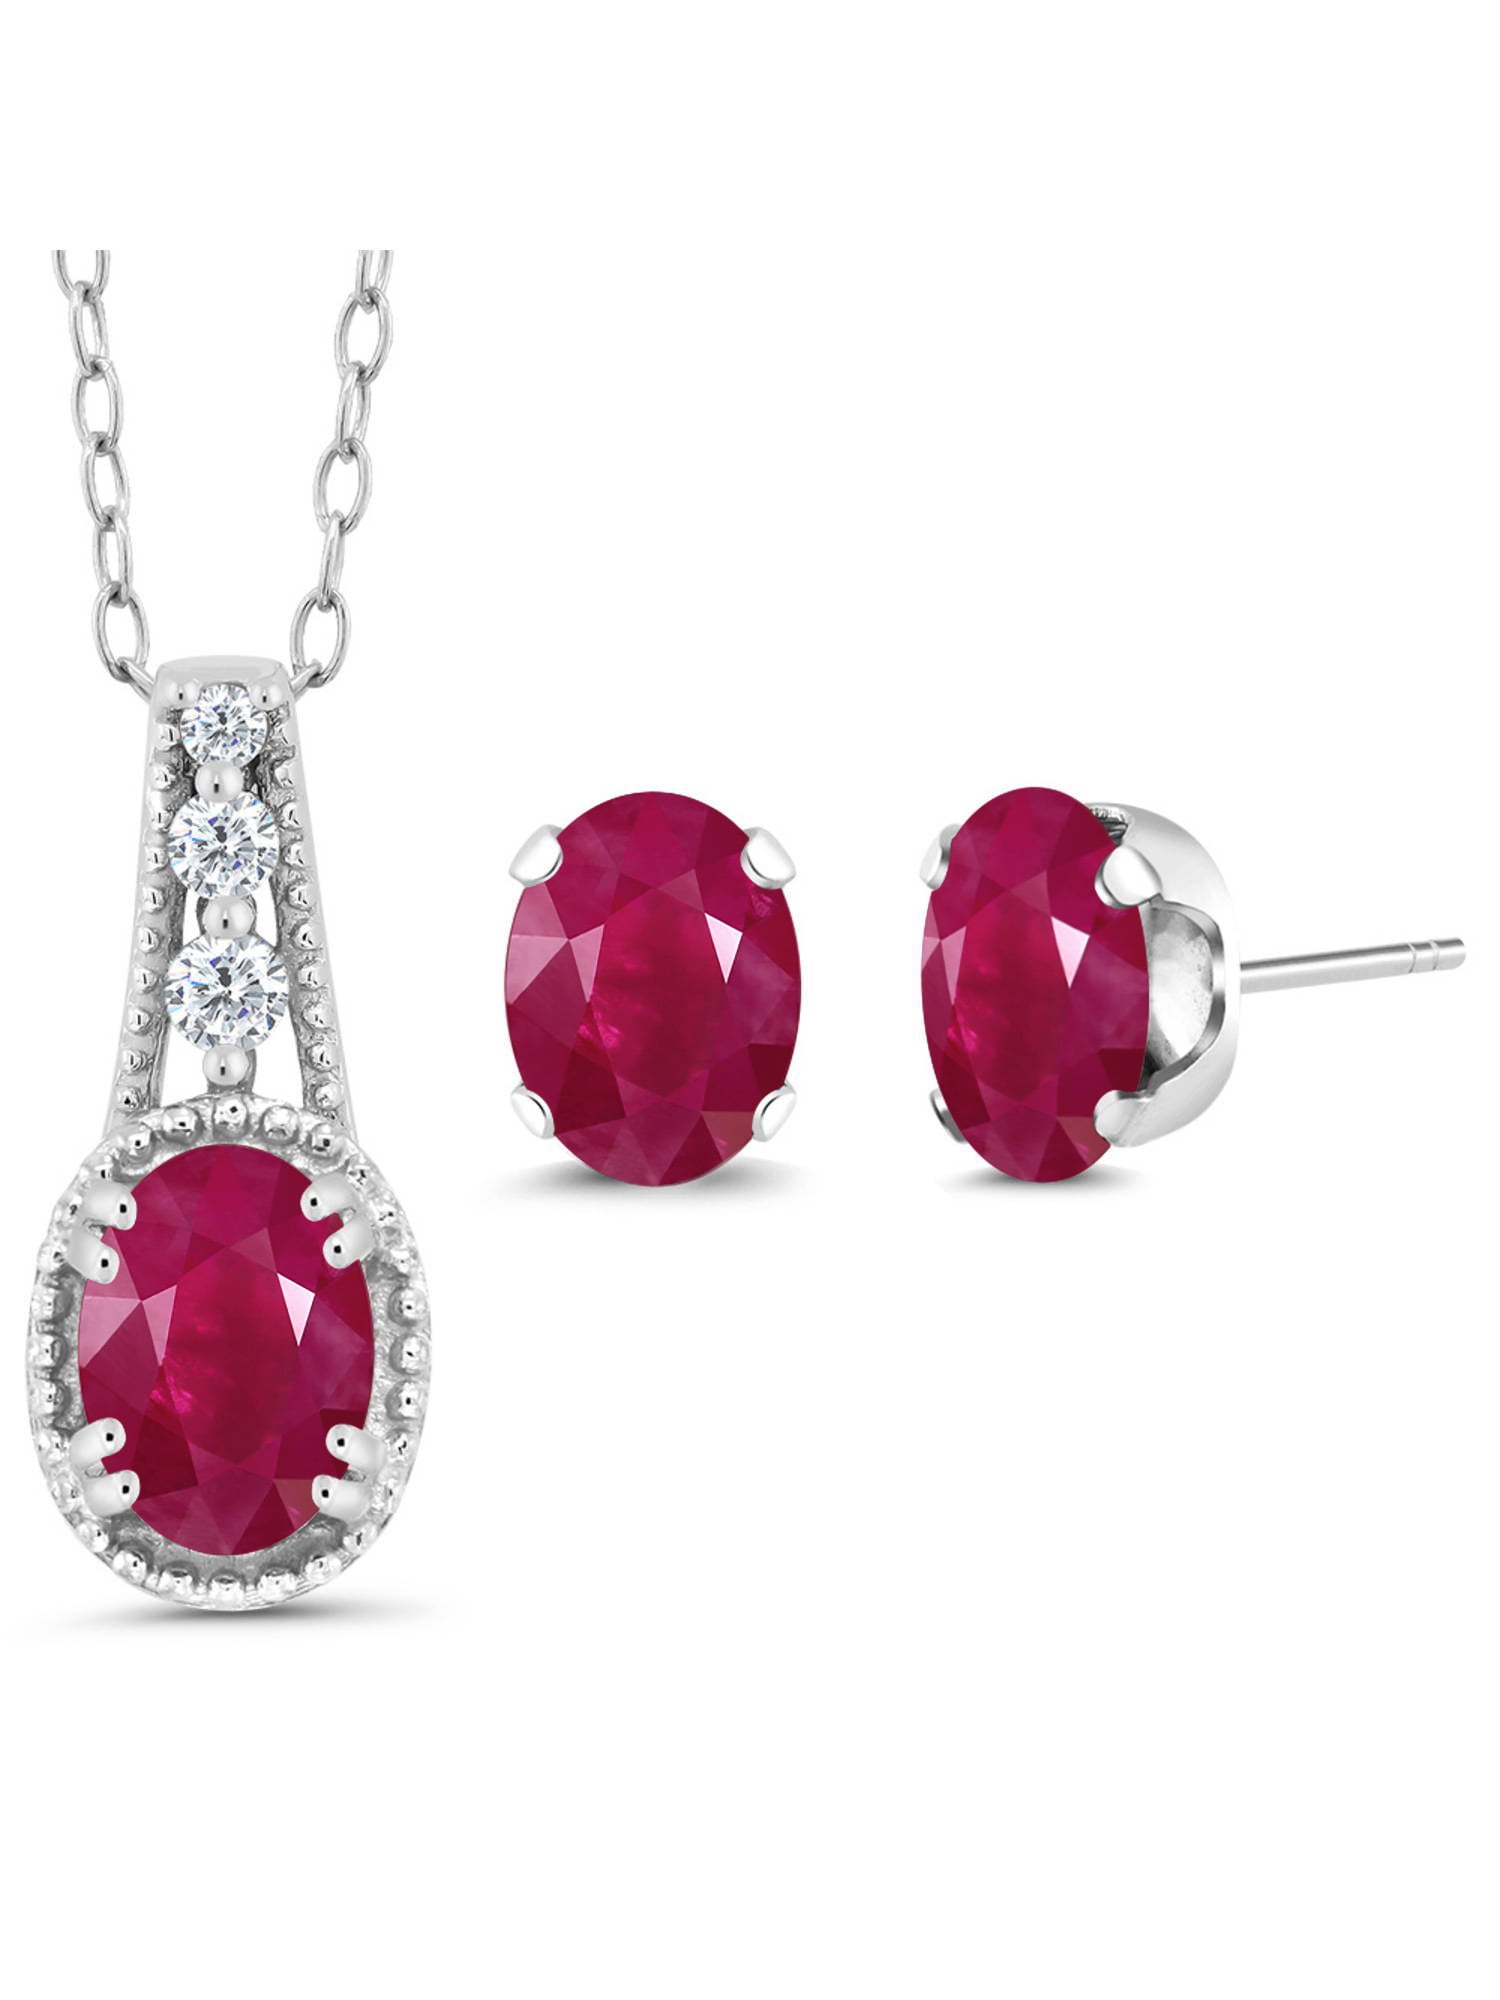 Gem Stone King - 1.88 Ct Oval Red Ruby 925 Sterling Silver Pendant ...